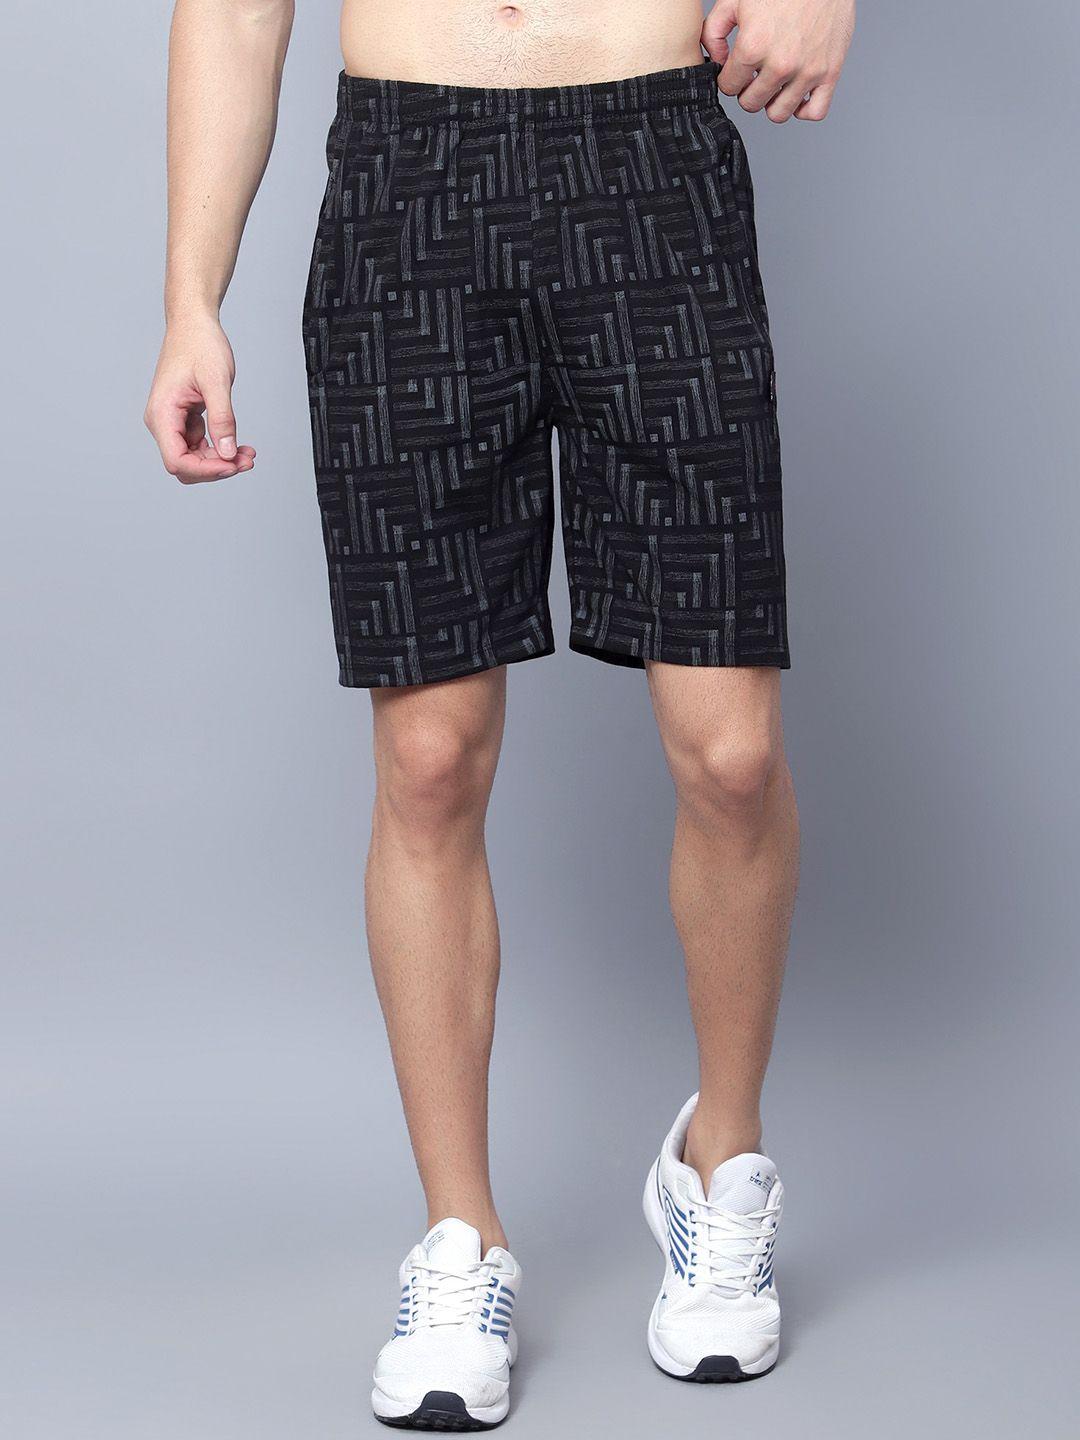 sky heights men geometric printed cotton training or gym sports shorts